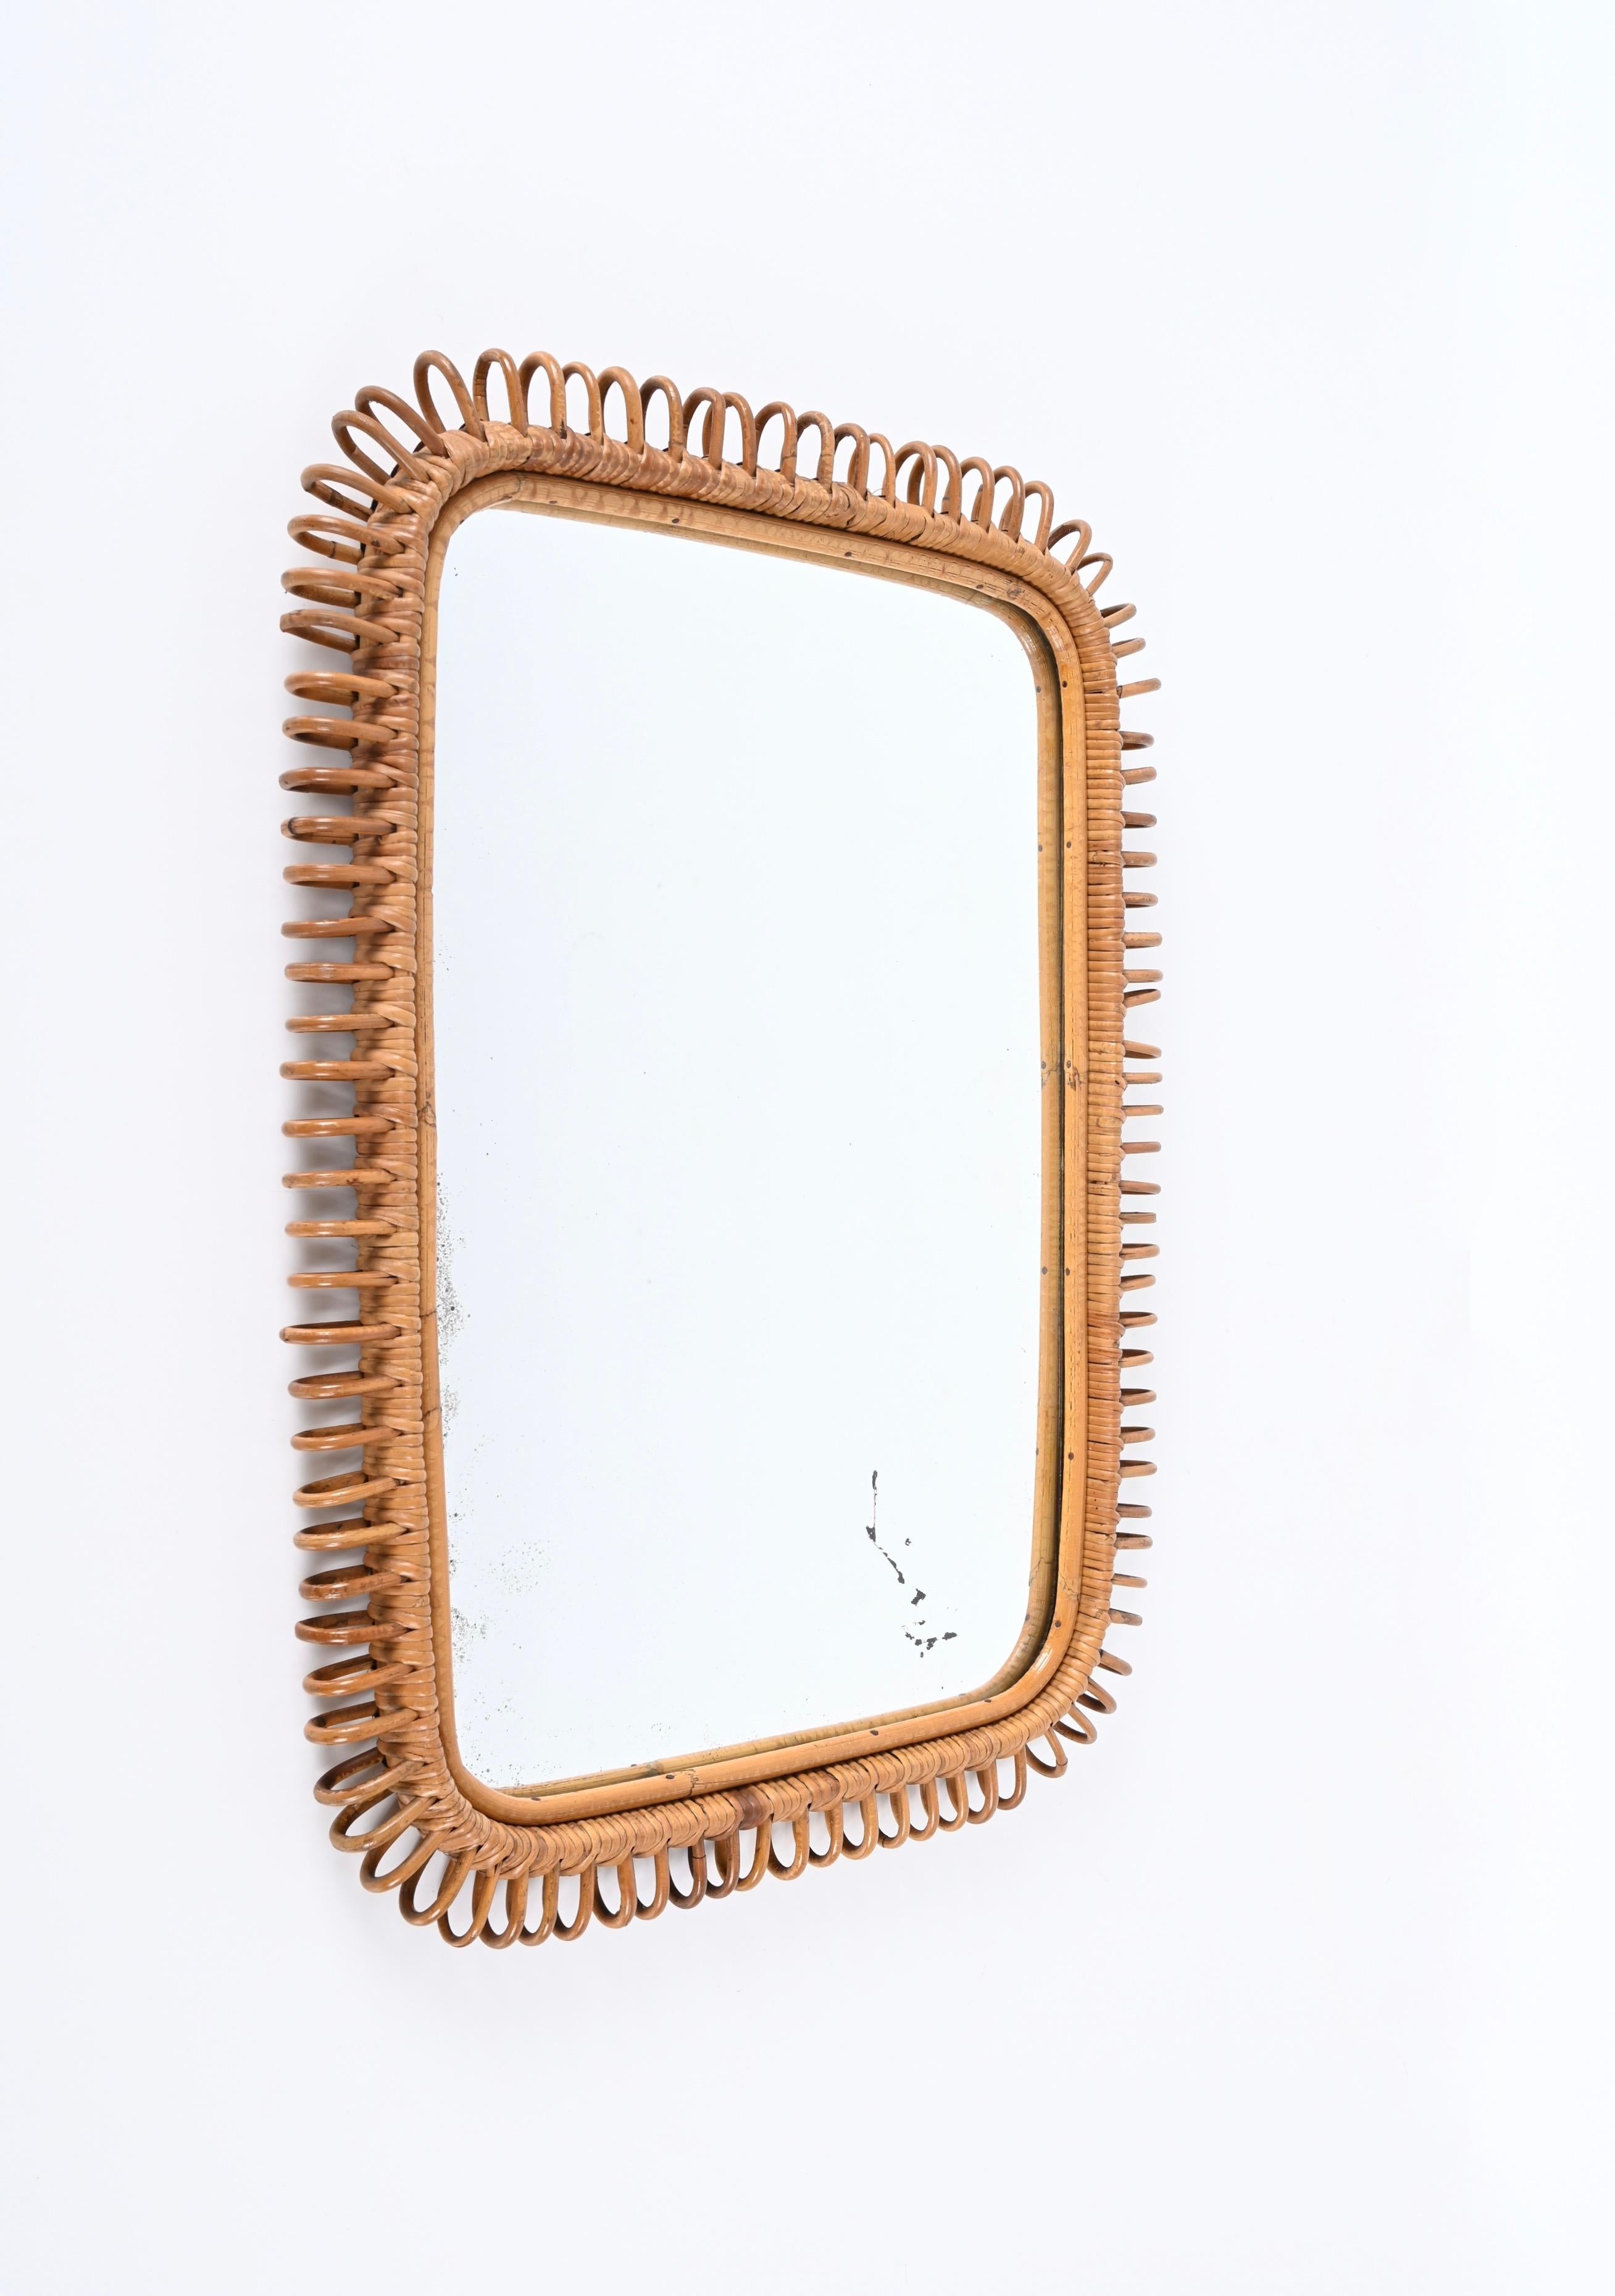 Fantastic large rectangular wall mirror in bamboo and rattan. This Cote d'Azur style mirror is attributed to the craftsmanship of Franco Albini and was designed in Italy during the 1970s.

The glass mirror is original and signed on the back with the